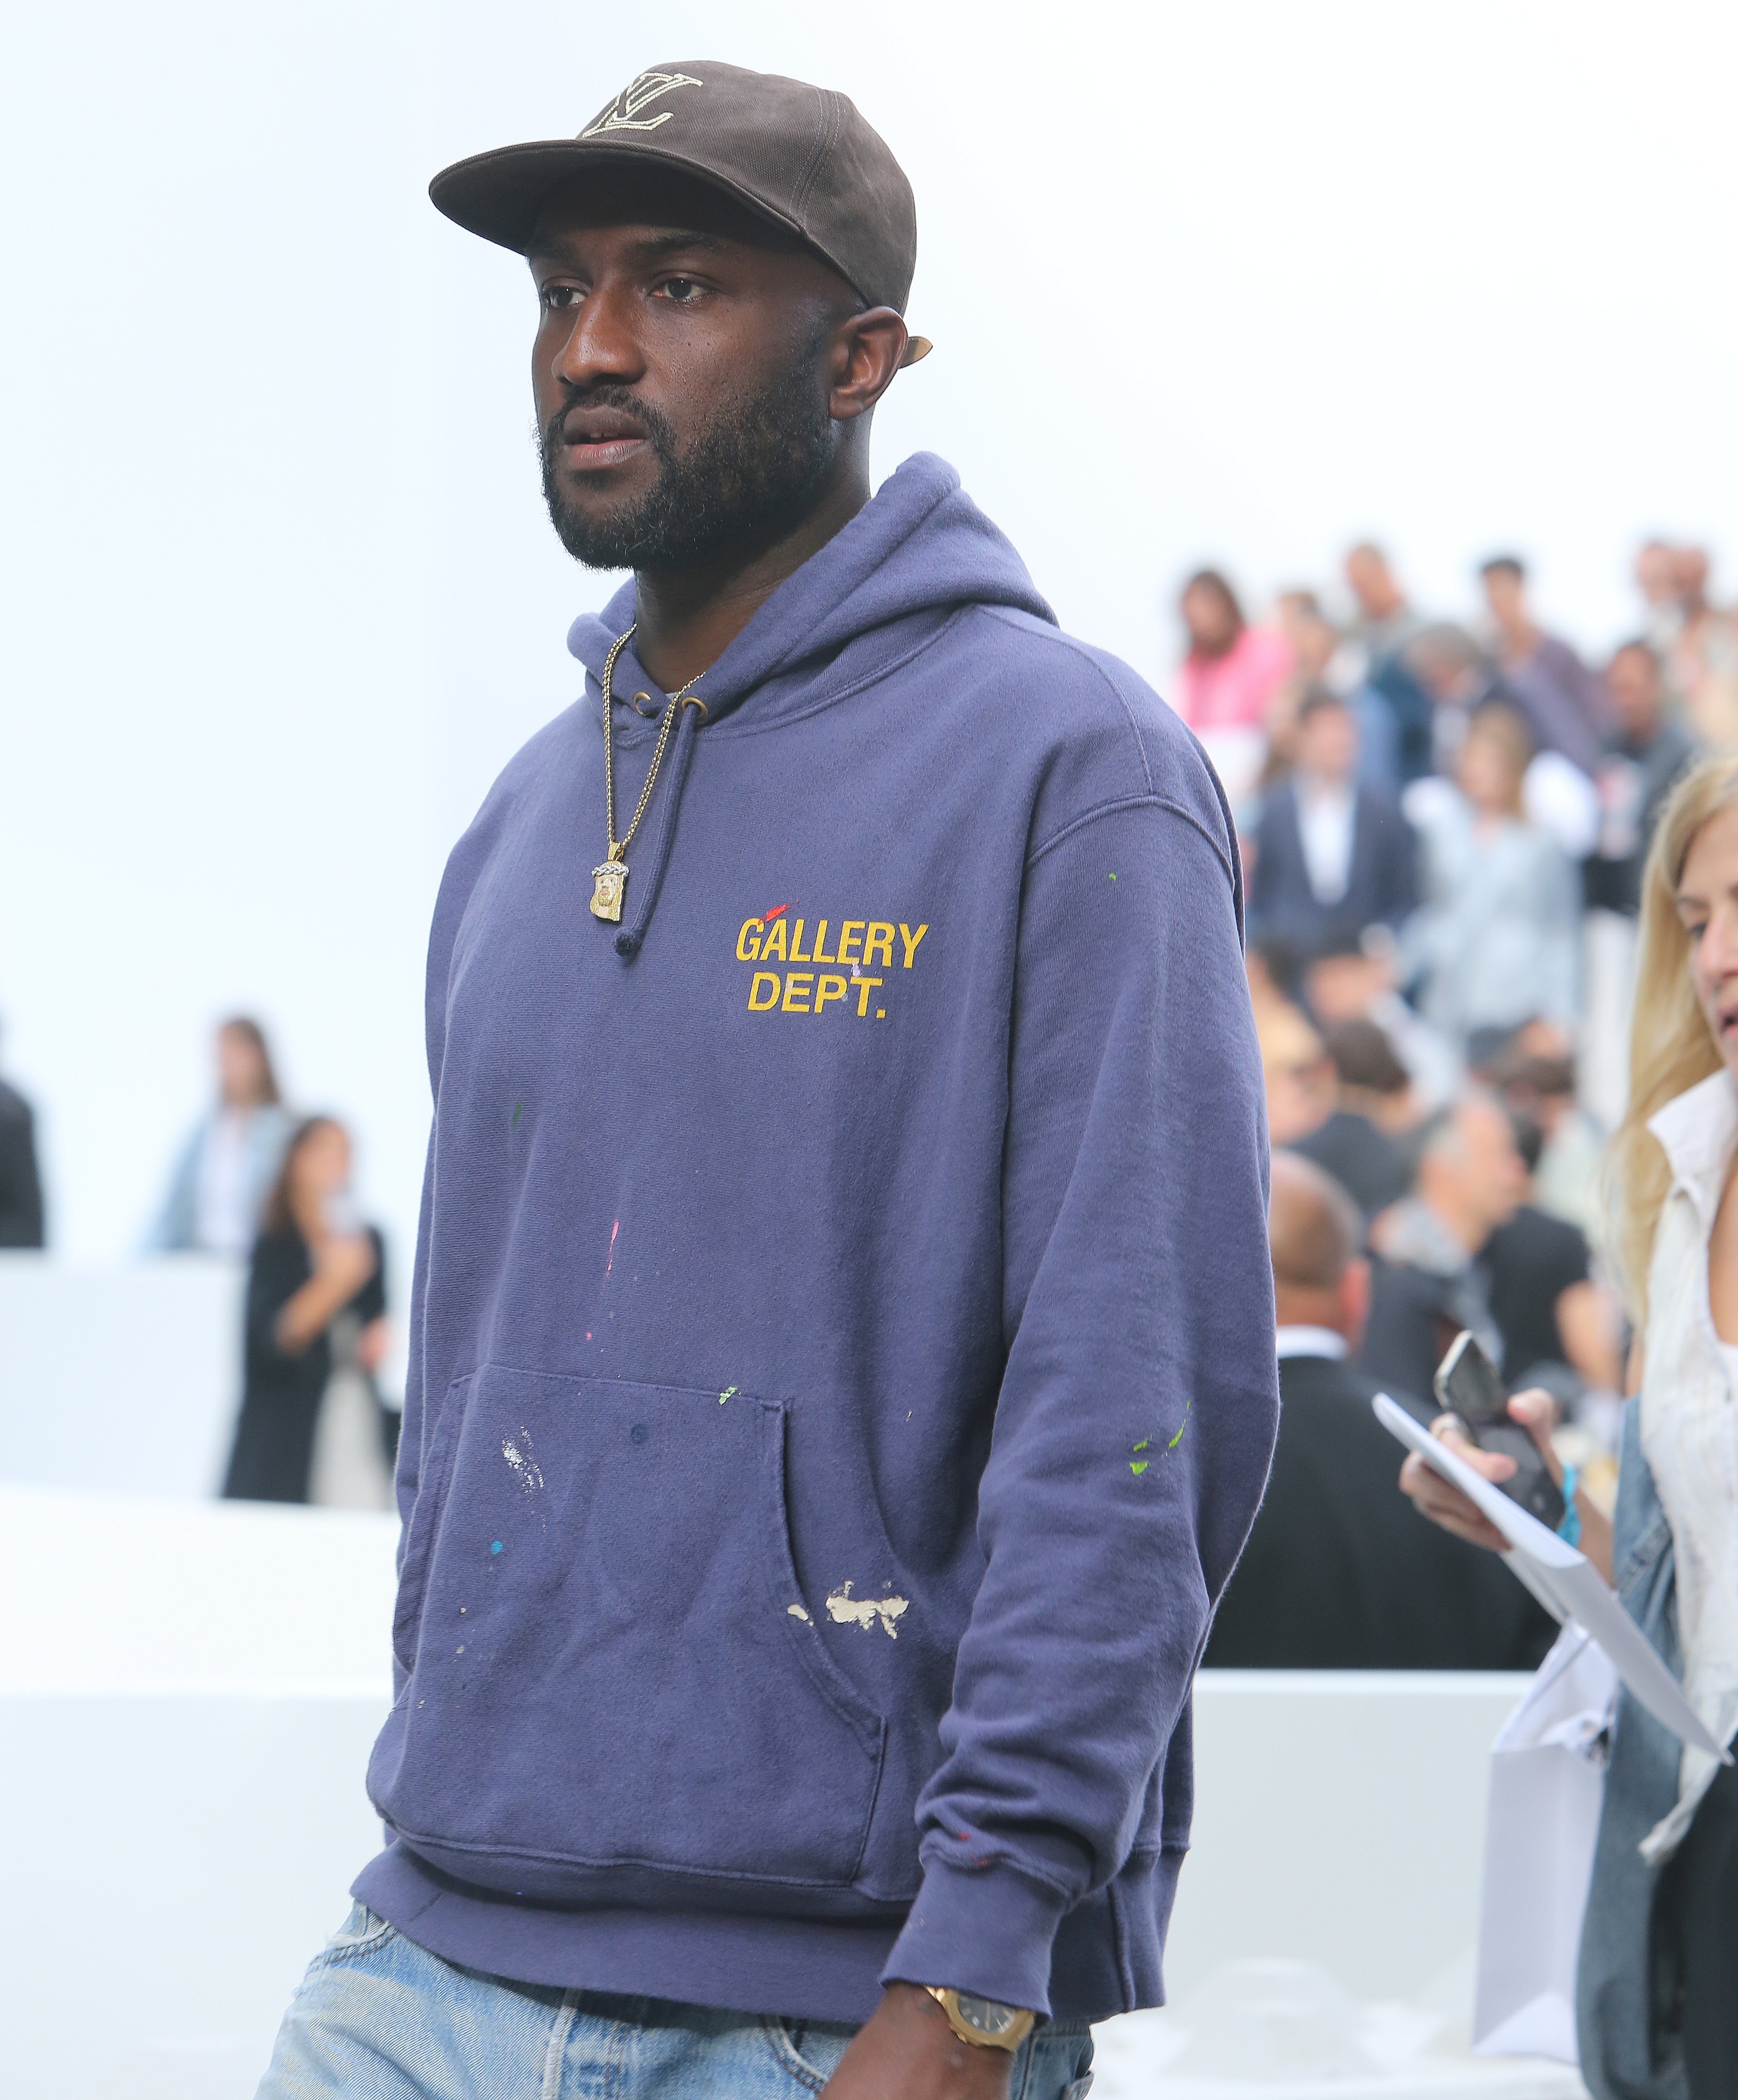 Virgil Abloh and Mercedes-Benz Donate $160K from Sale of G-Class